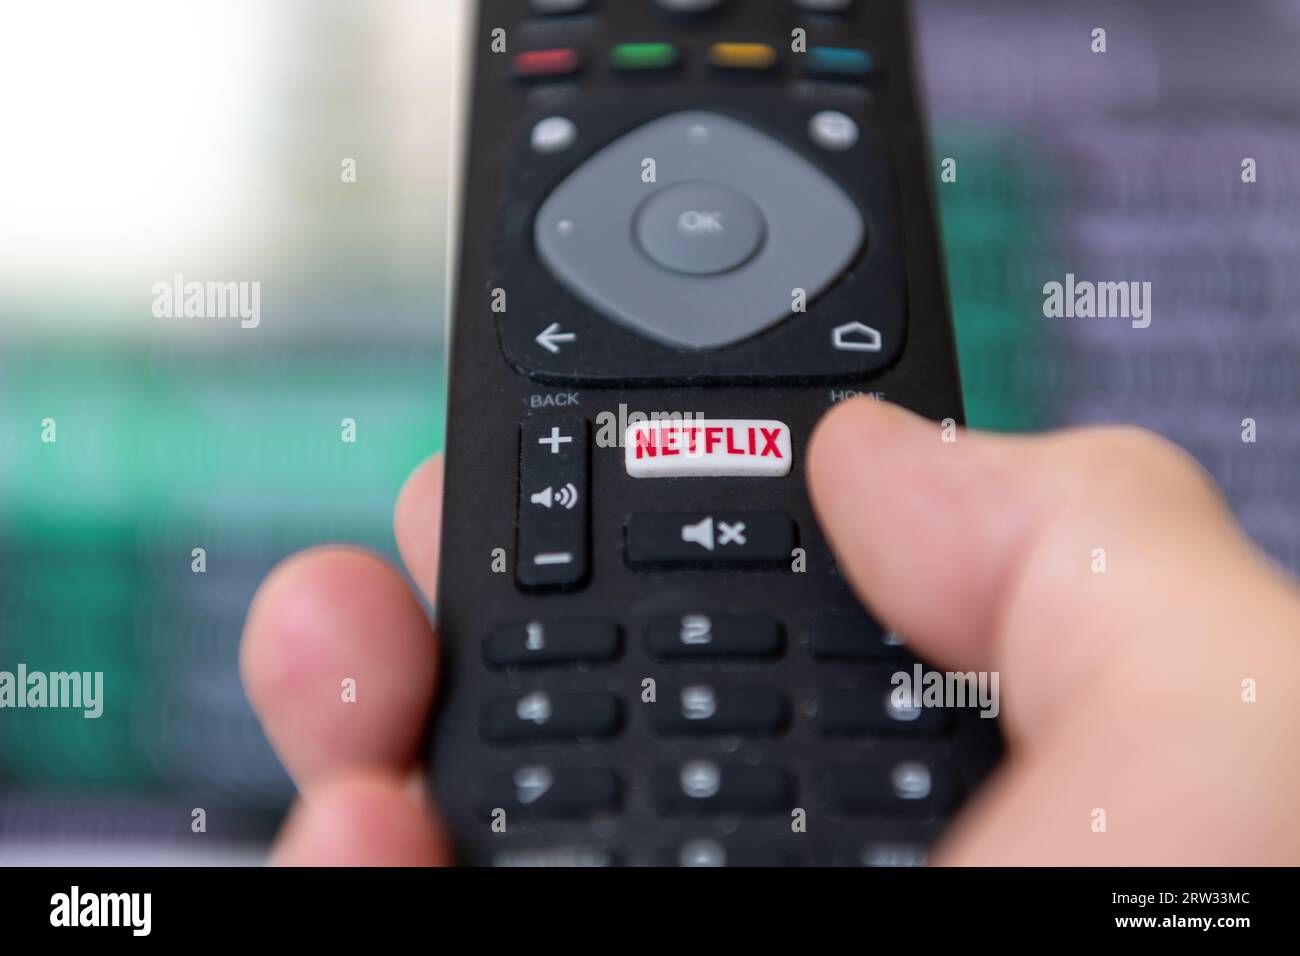 London. UK- 09.13.2023. A person using the remote control to access the popular streaming entertainment service provider Netflix. Stock Photo